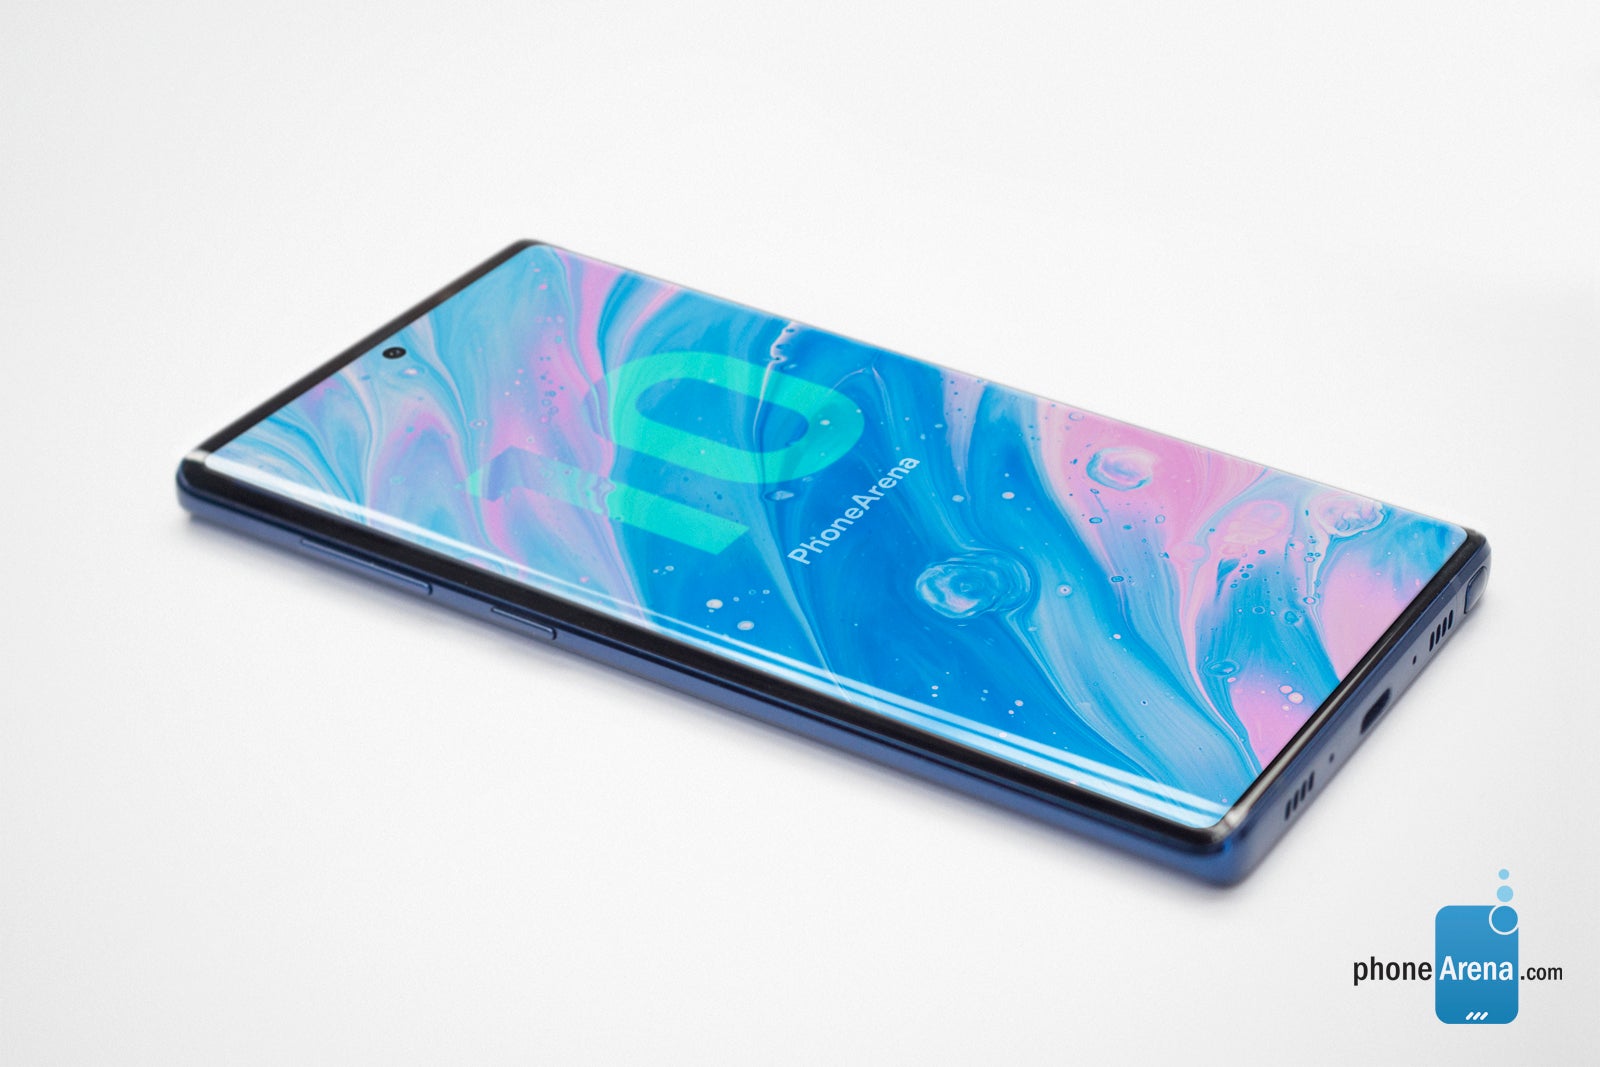 Concept image - Samsung Galaxy Note 10 rumor review: release date, price, specs, and features of the future beast